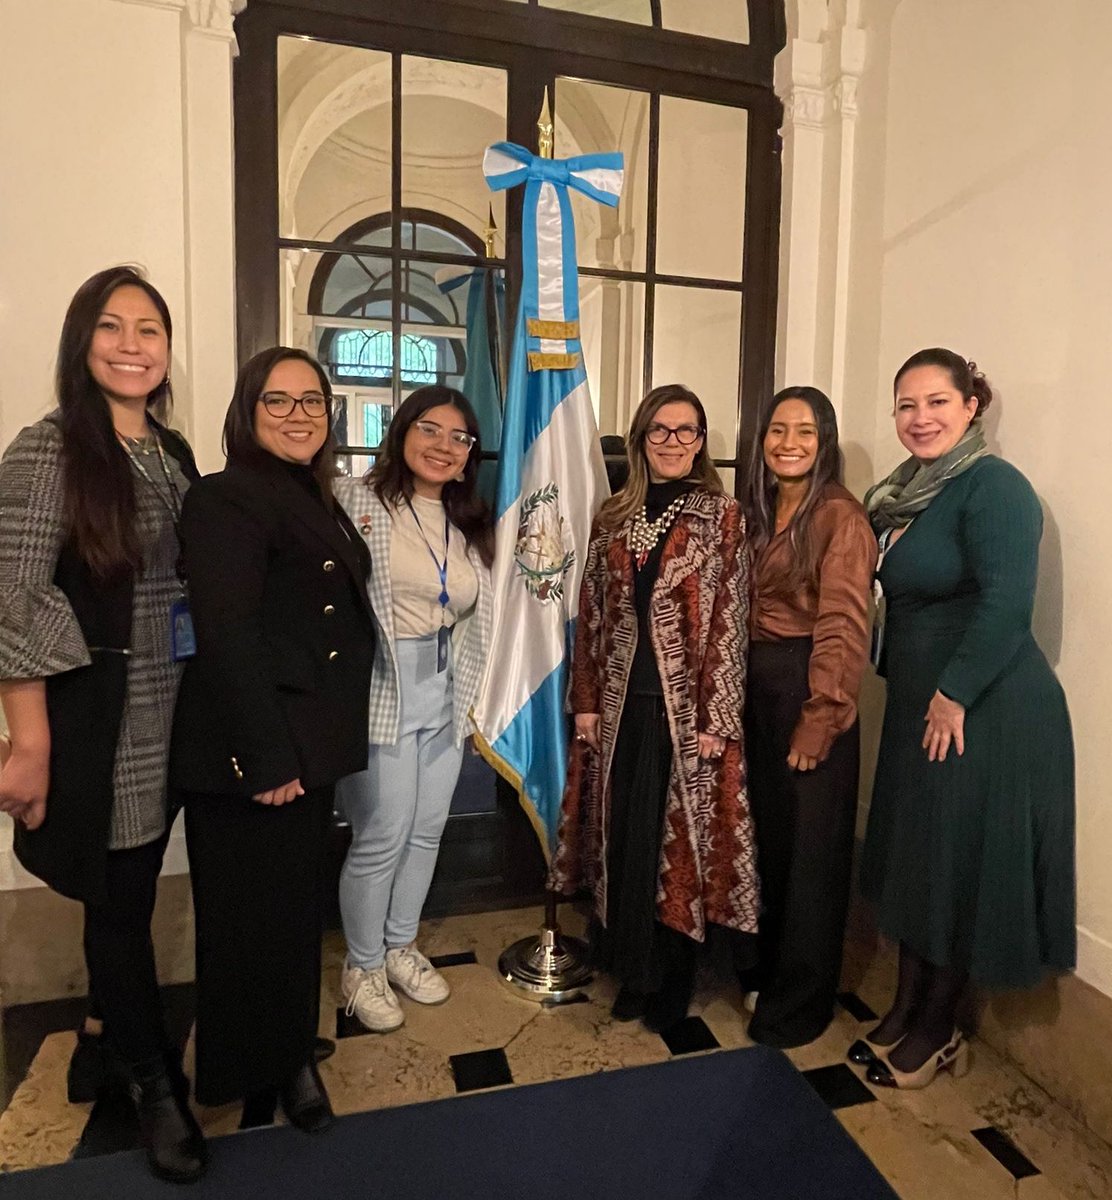 Thanks to @ferlmonzon @lamajitofm___ for visiting the Permanent Mission of Guatemala during their participation in the @UNECOSOC #Youth2030 Forum. #YouthLead towards #OurCommonFuture